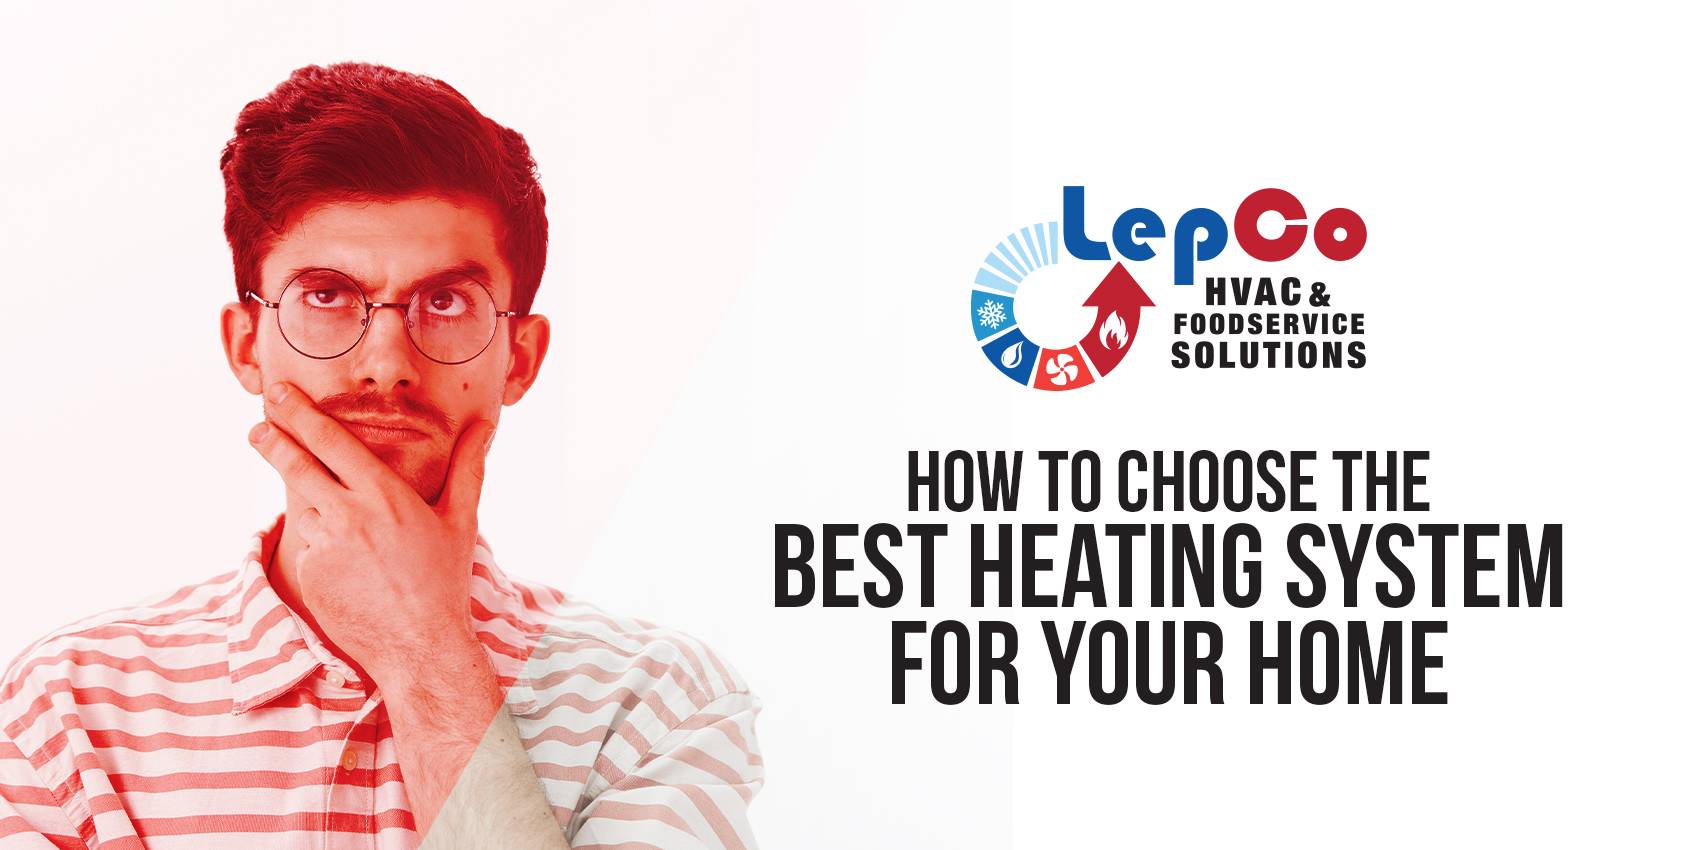 A man thinks Lepco HVAC and food service solution for heating system in your home